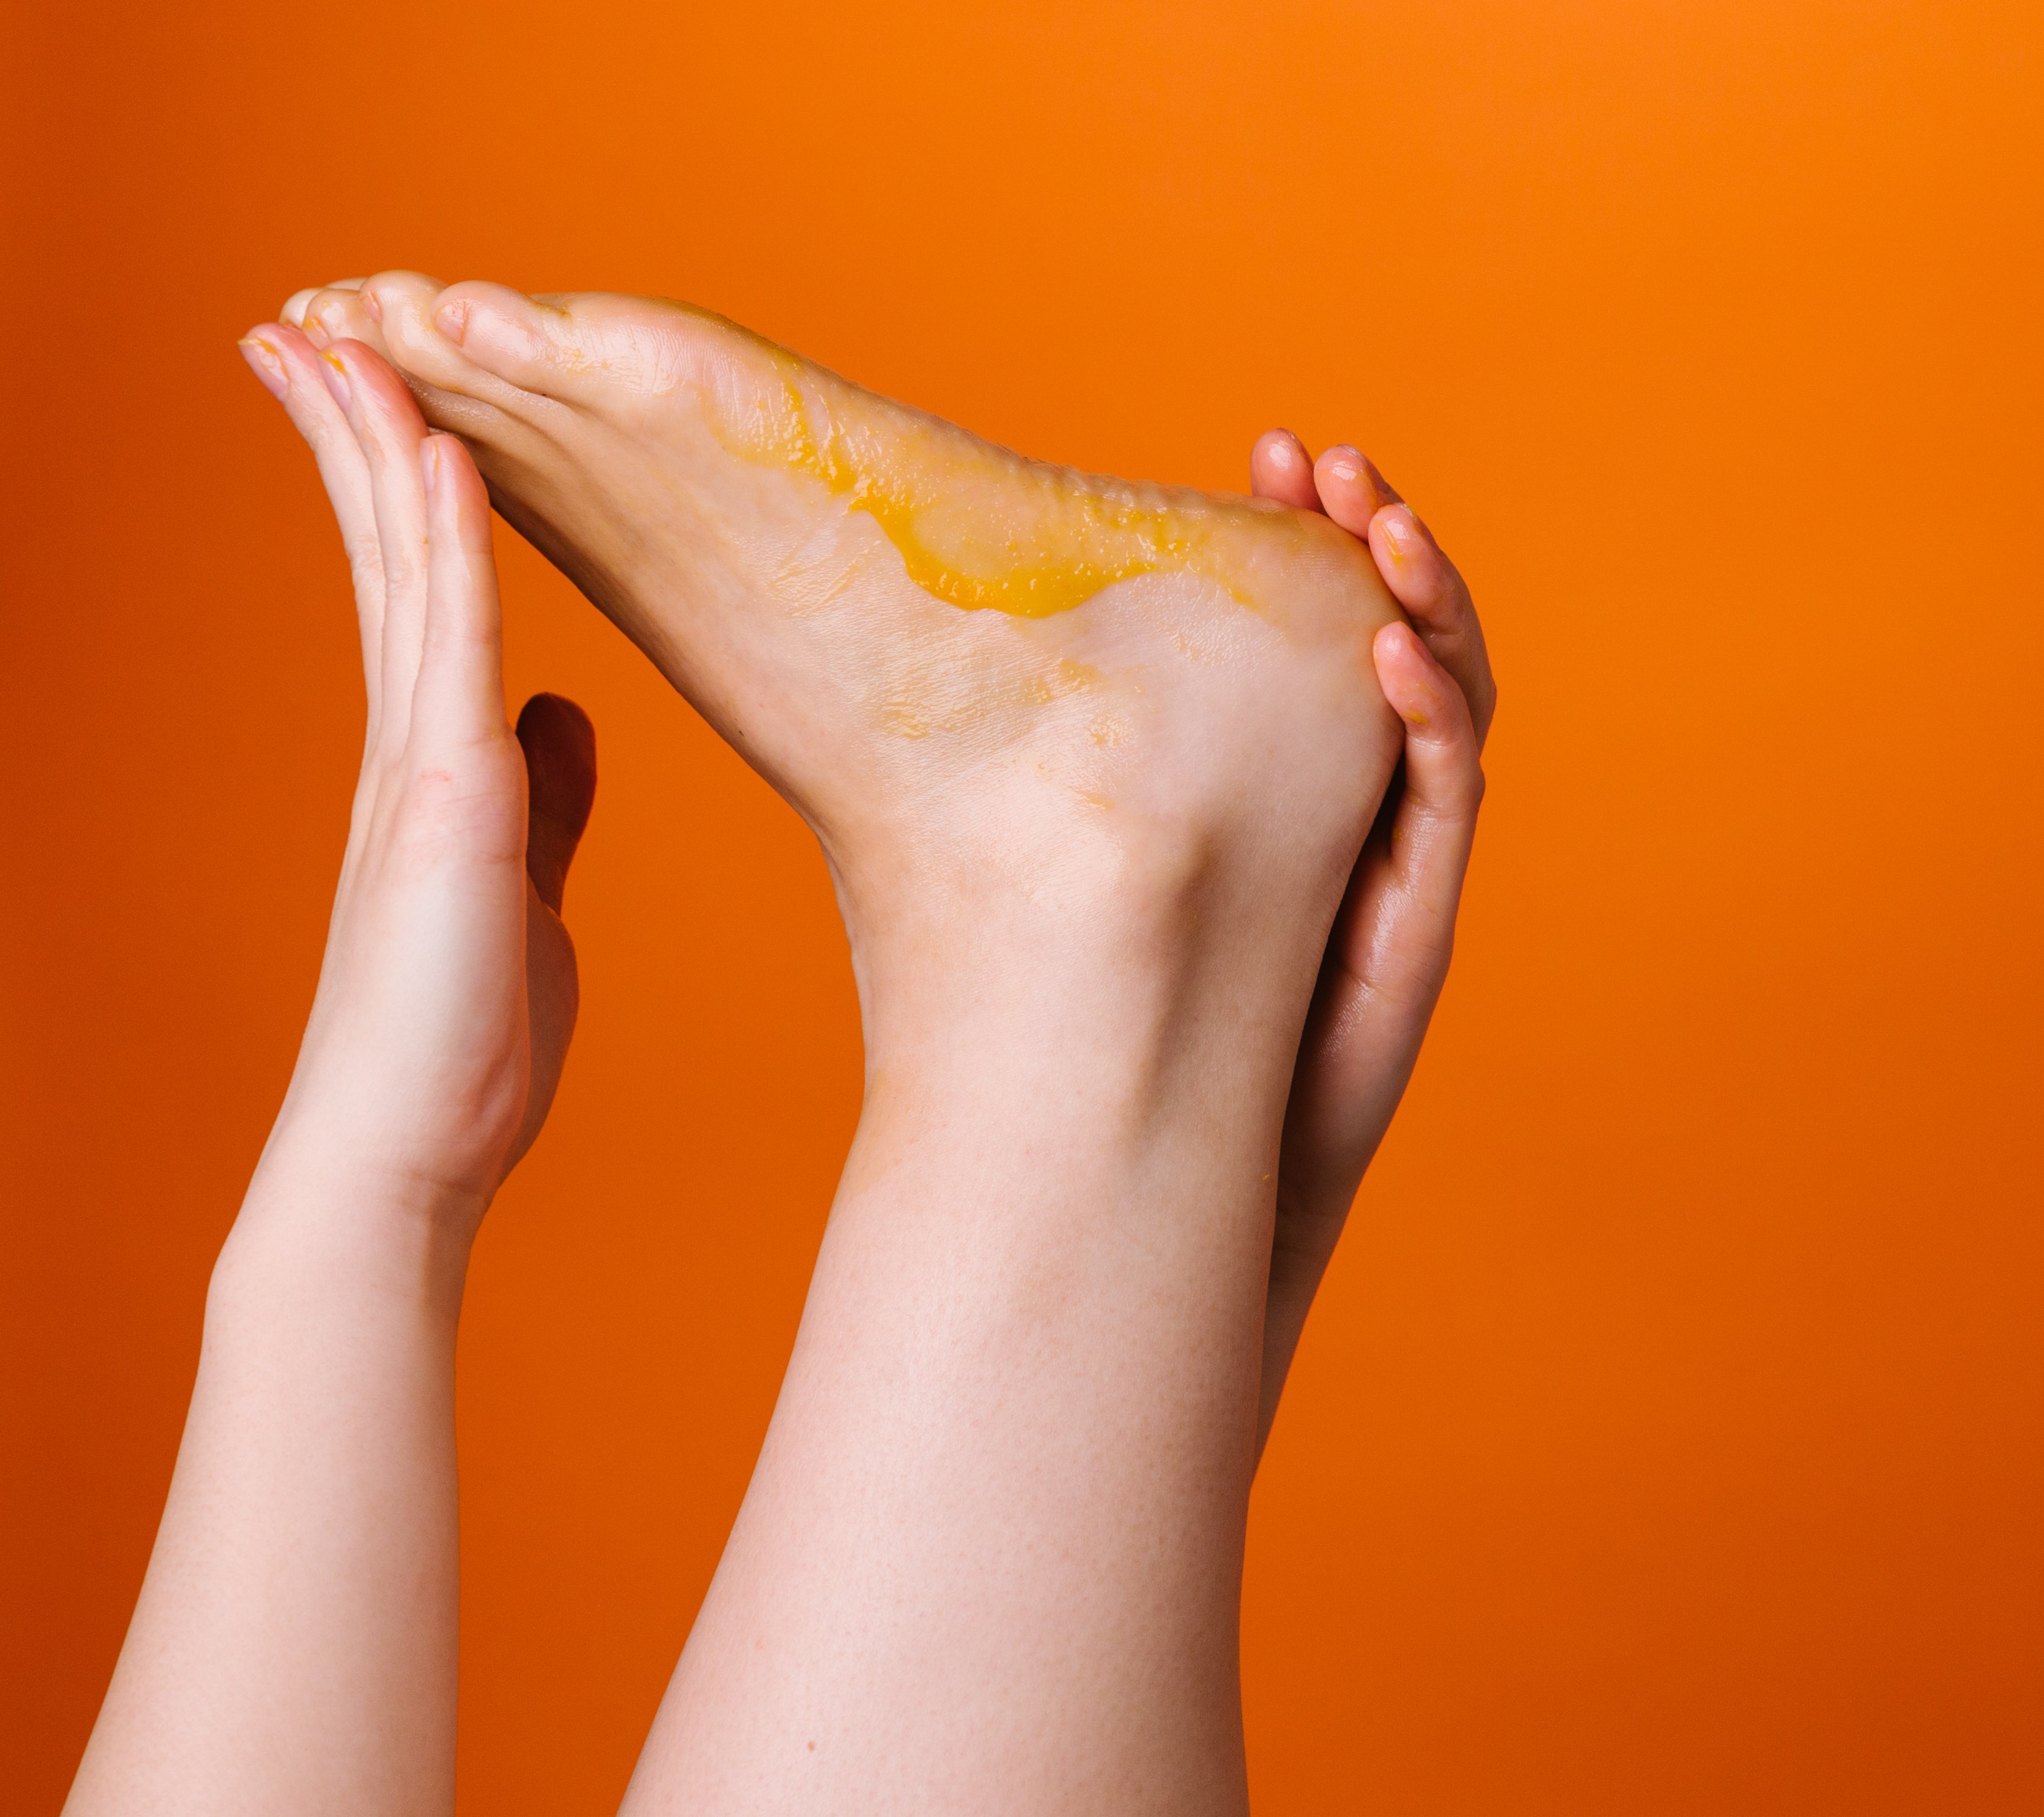 In front of an orange backdrop, a foot is being stretched by two hands, with its sole facing upwards, coated in an orange balm.